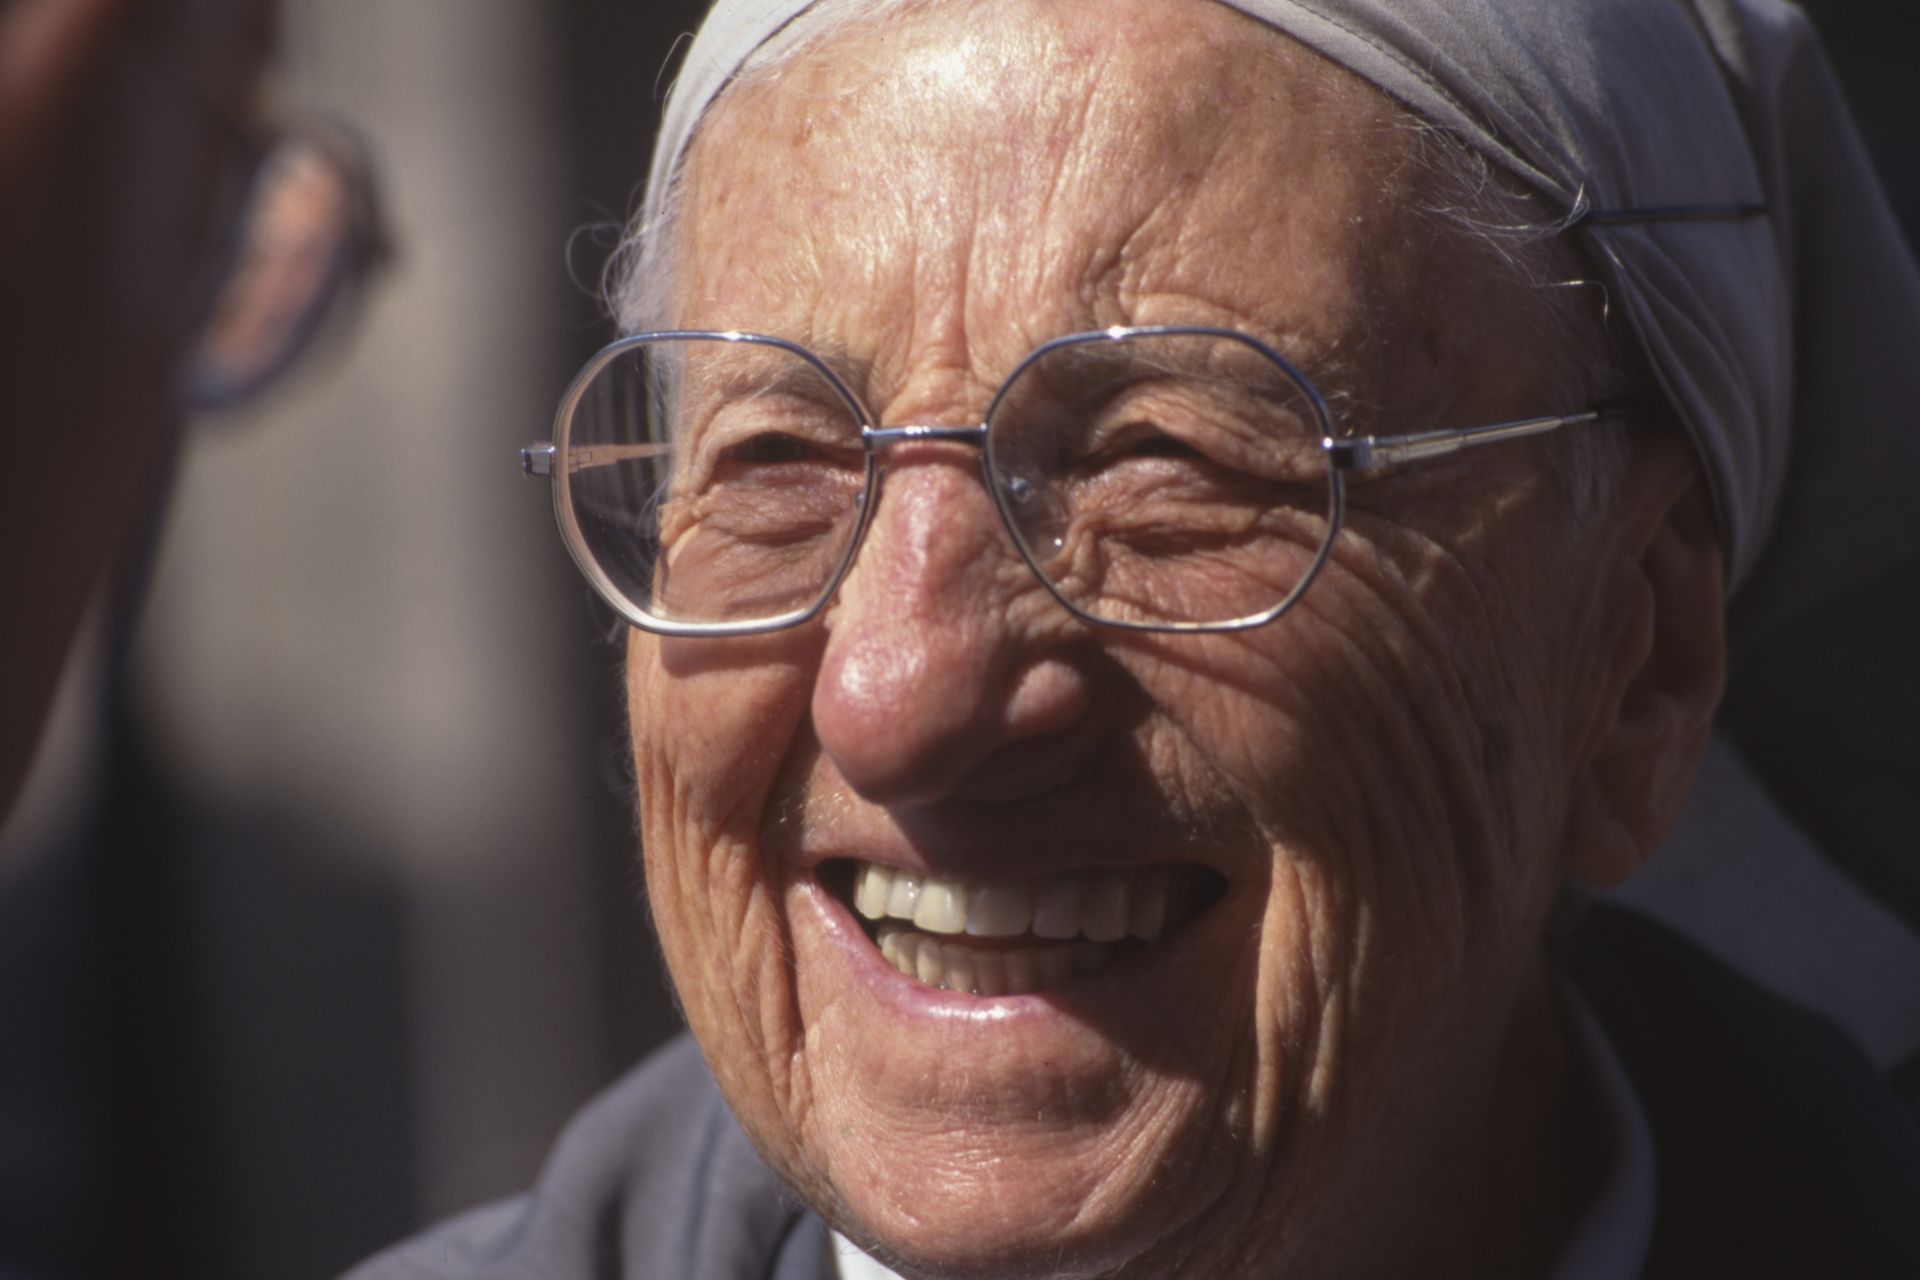 <p>If Hergé, Jacques Brel, or now Stromae are part of Belgian culture, the country also houses Sister Emmanuelle. Born in Brussels in 1908, the nun did charitable work in Egypt and Turkey. She died in France at age 99.</p>